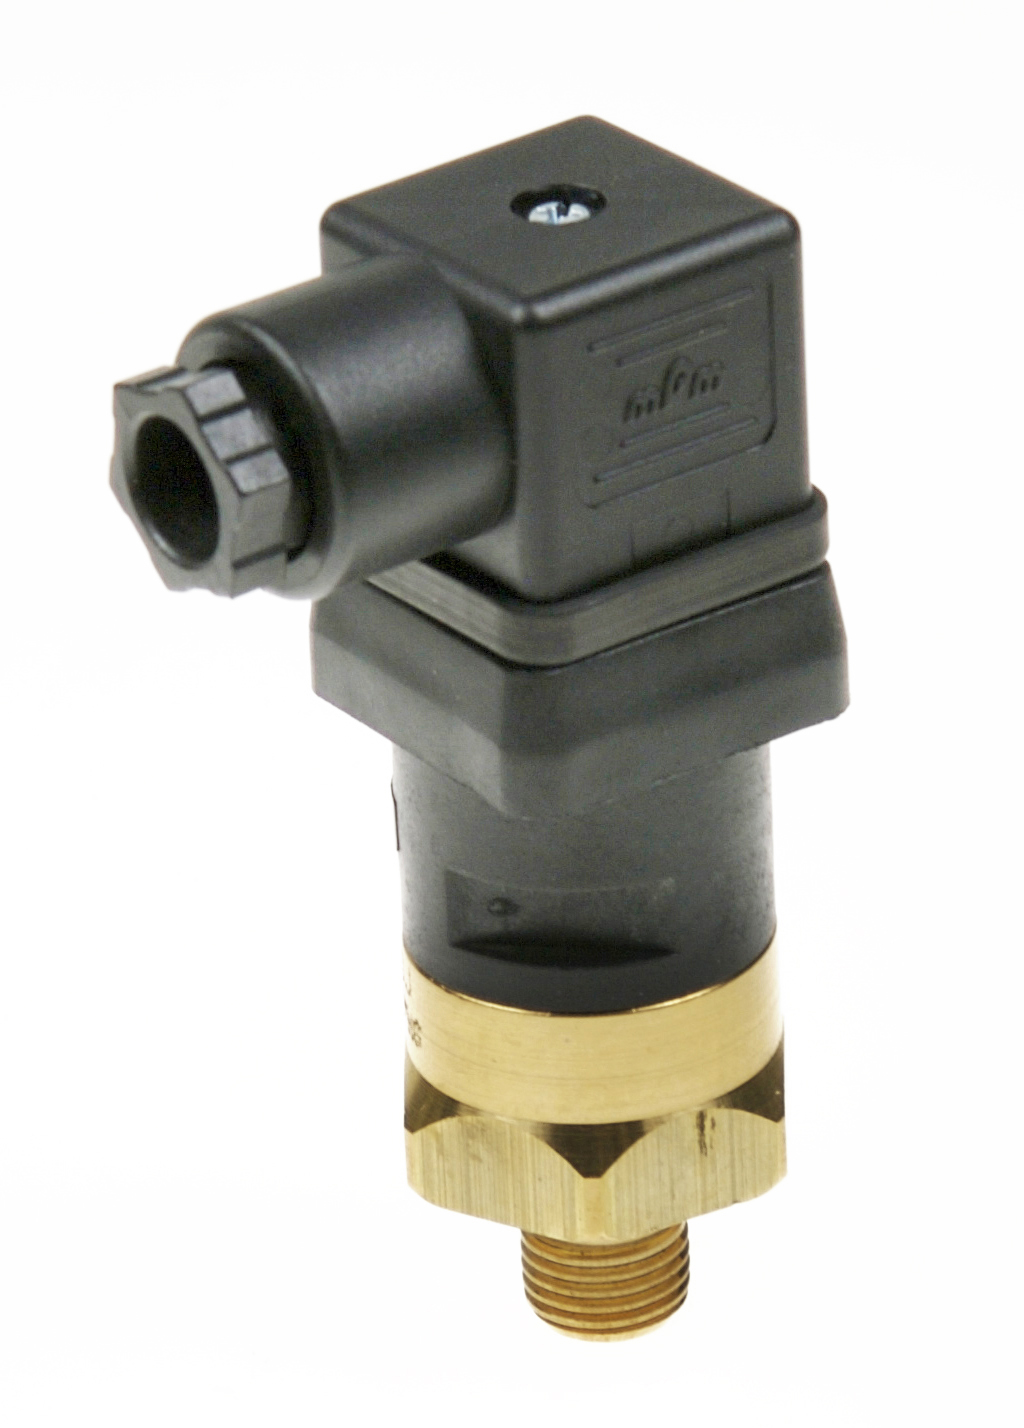 DIN 43650A 9 mm Cable Clamp 7-30 psi Range SPDT Circuit Gems PS41-20-2MNB-C-HC Series PS41 Economical Miniature Pressure Switch 1/8 MNPT Brass Fitting Pack of 10 